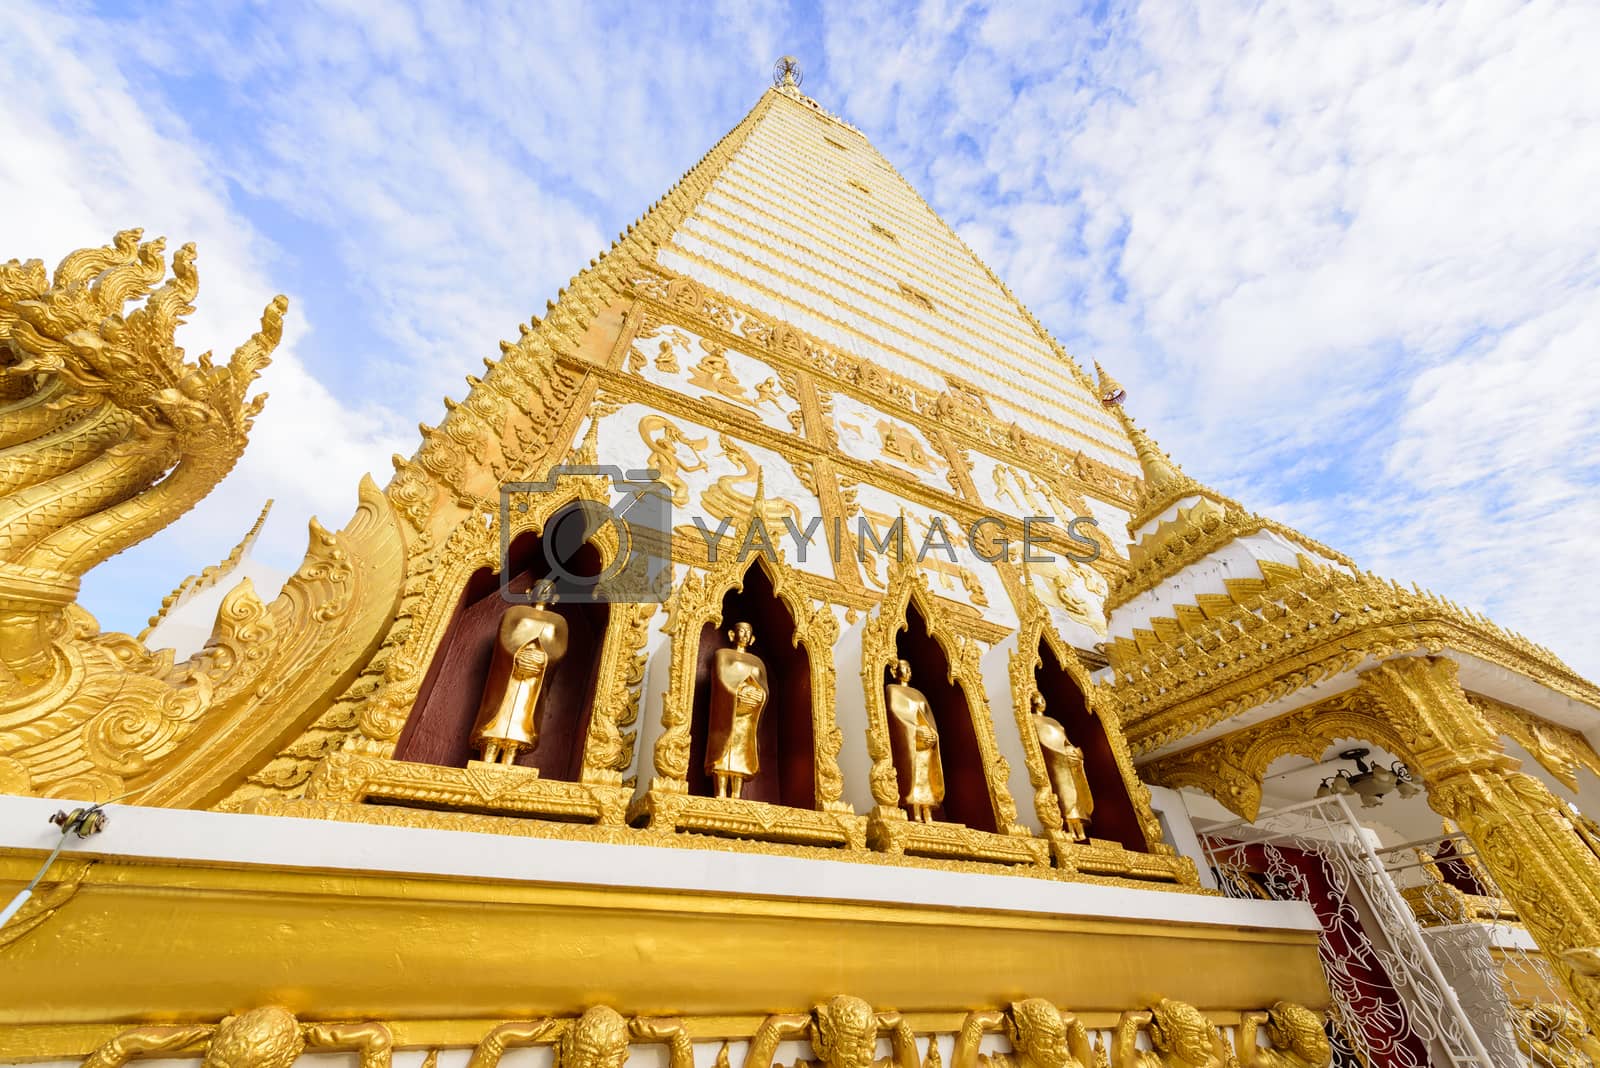 Royalty free image of Wat Phra That Nong Bua in the morning at Ubon Ratchathani, Thail by animagesdesign